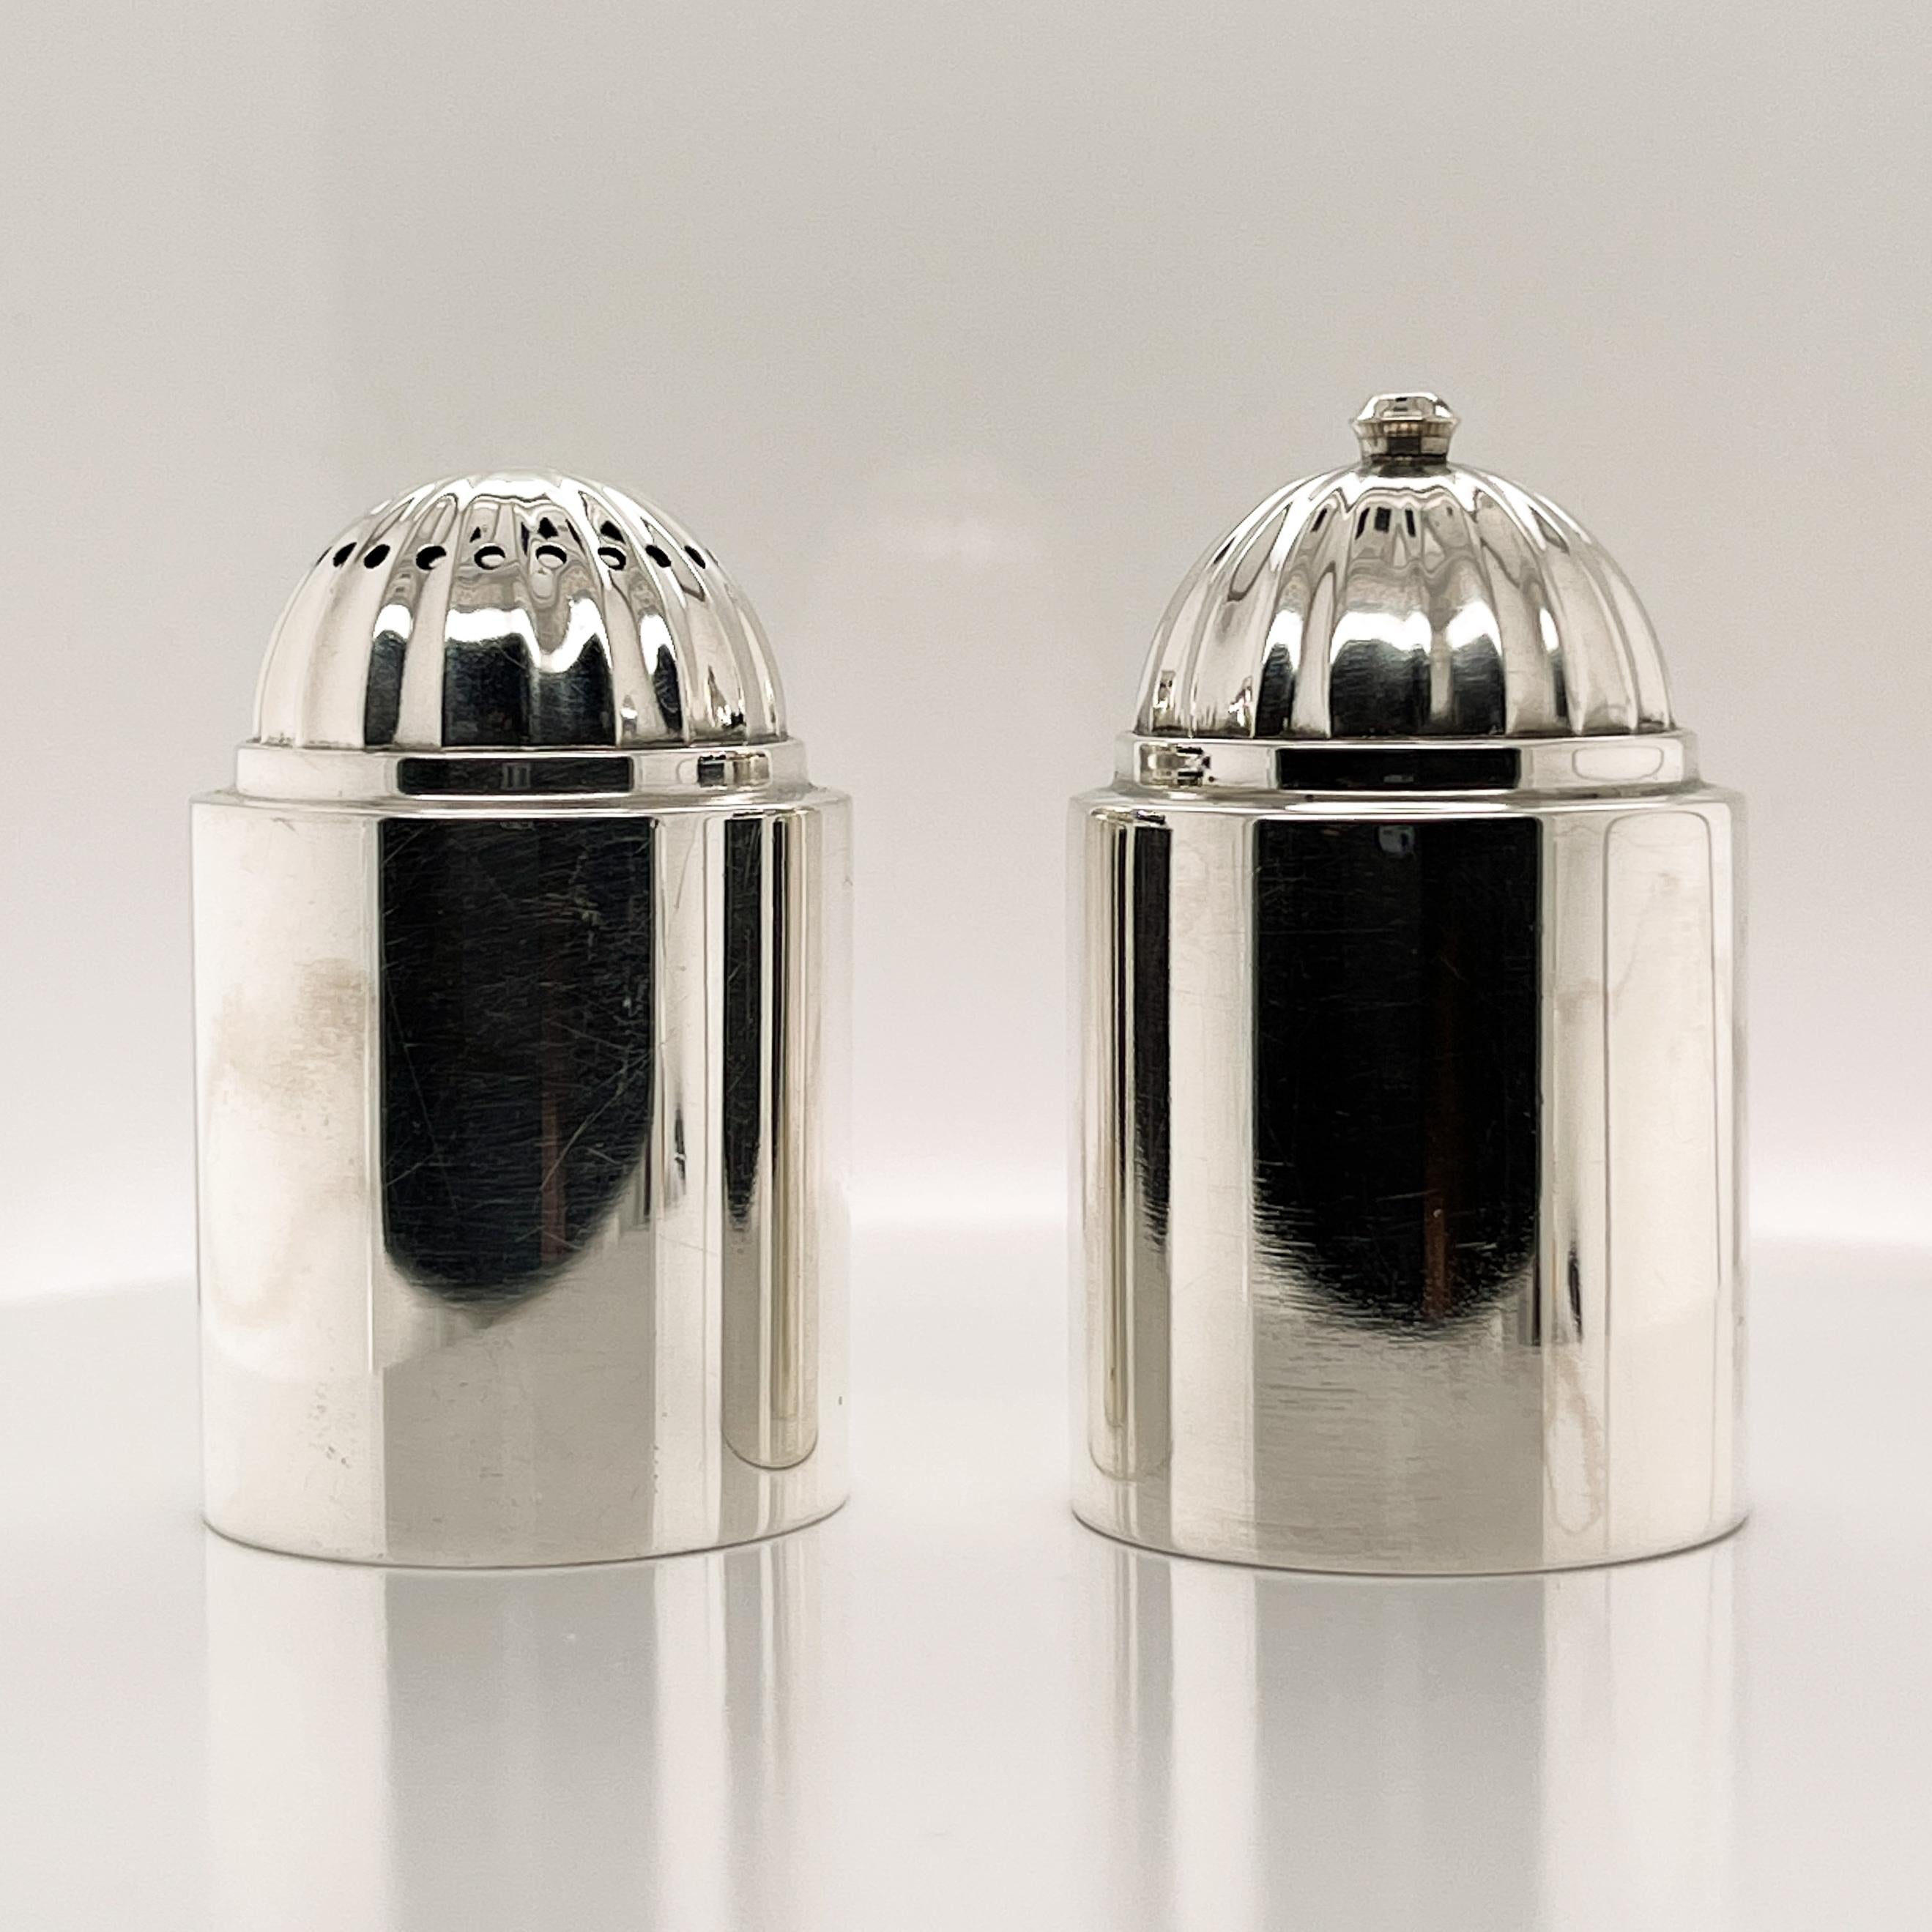 A rare pair of Georg Jensen sterling silver salt and pepper shakers.

Model No. 627. 

Designed by Ove Brobeck. 

A rare and fine pair!

Date:
20th century

Overall Condition:
They are in overall good, as-pictured, used estate condition with some